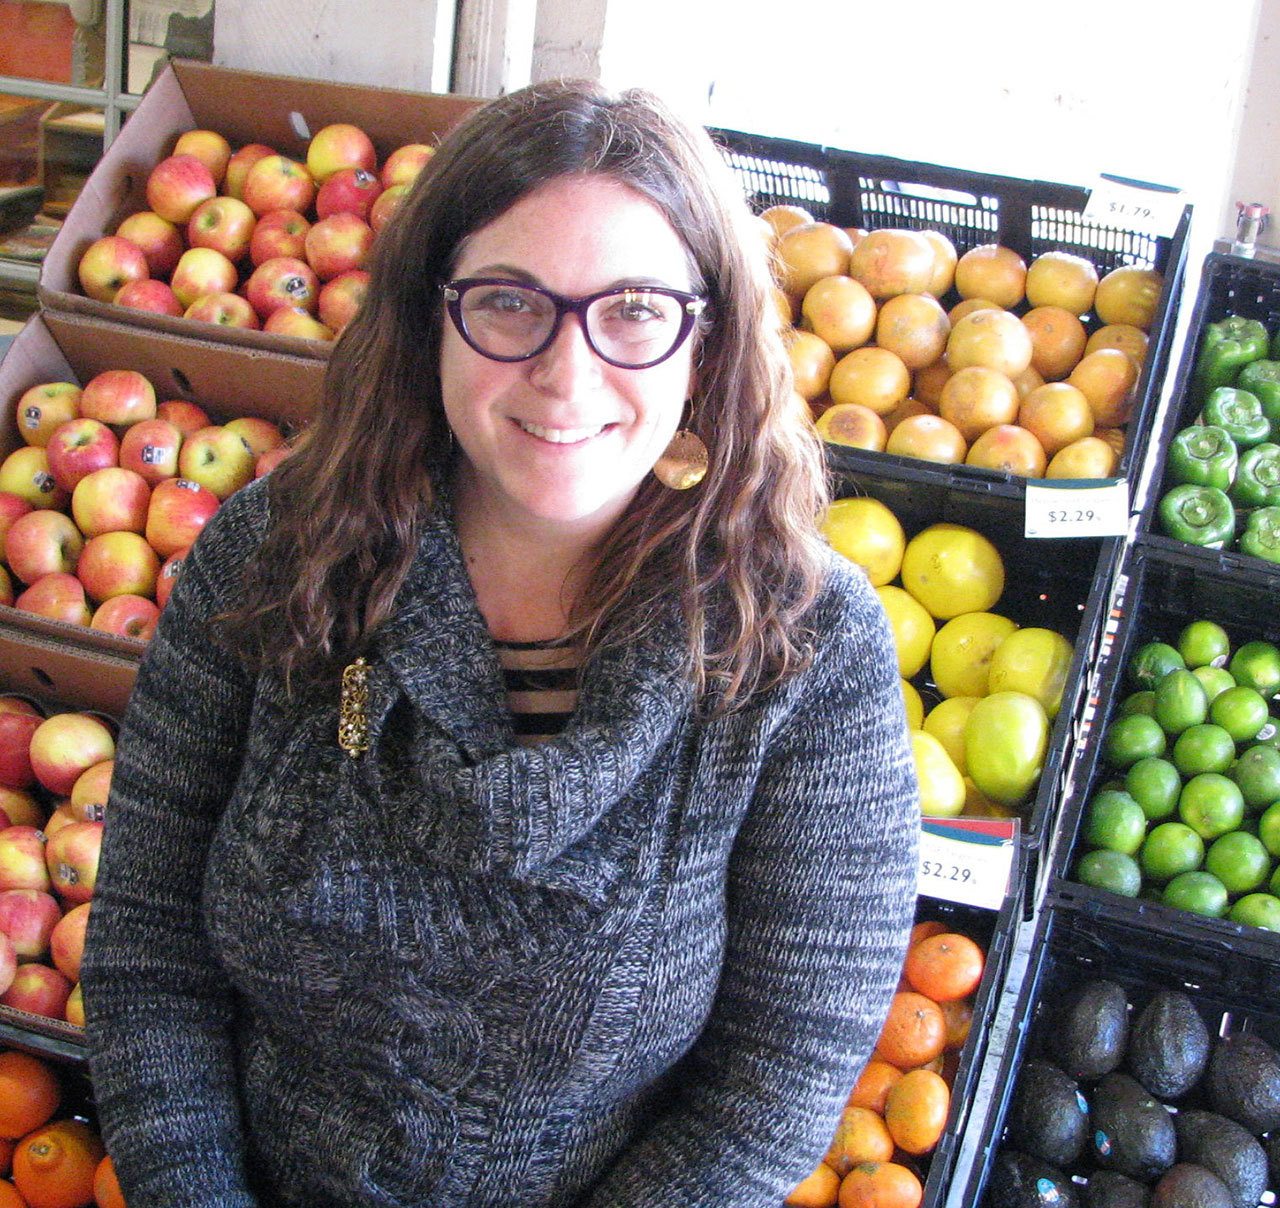 Laura Lewis, director of Jefferson County Extension, talks about “Food Security” at noon Thursday, Feb. 9, in Port Angeles. Submitted photo